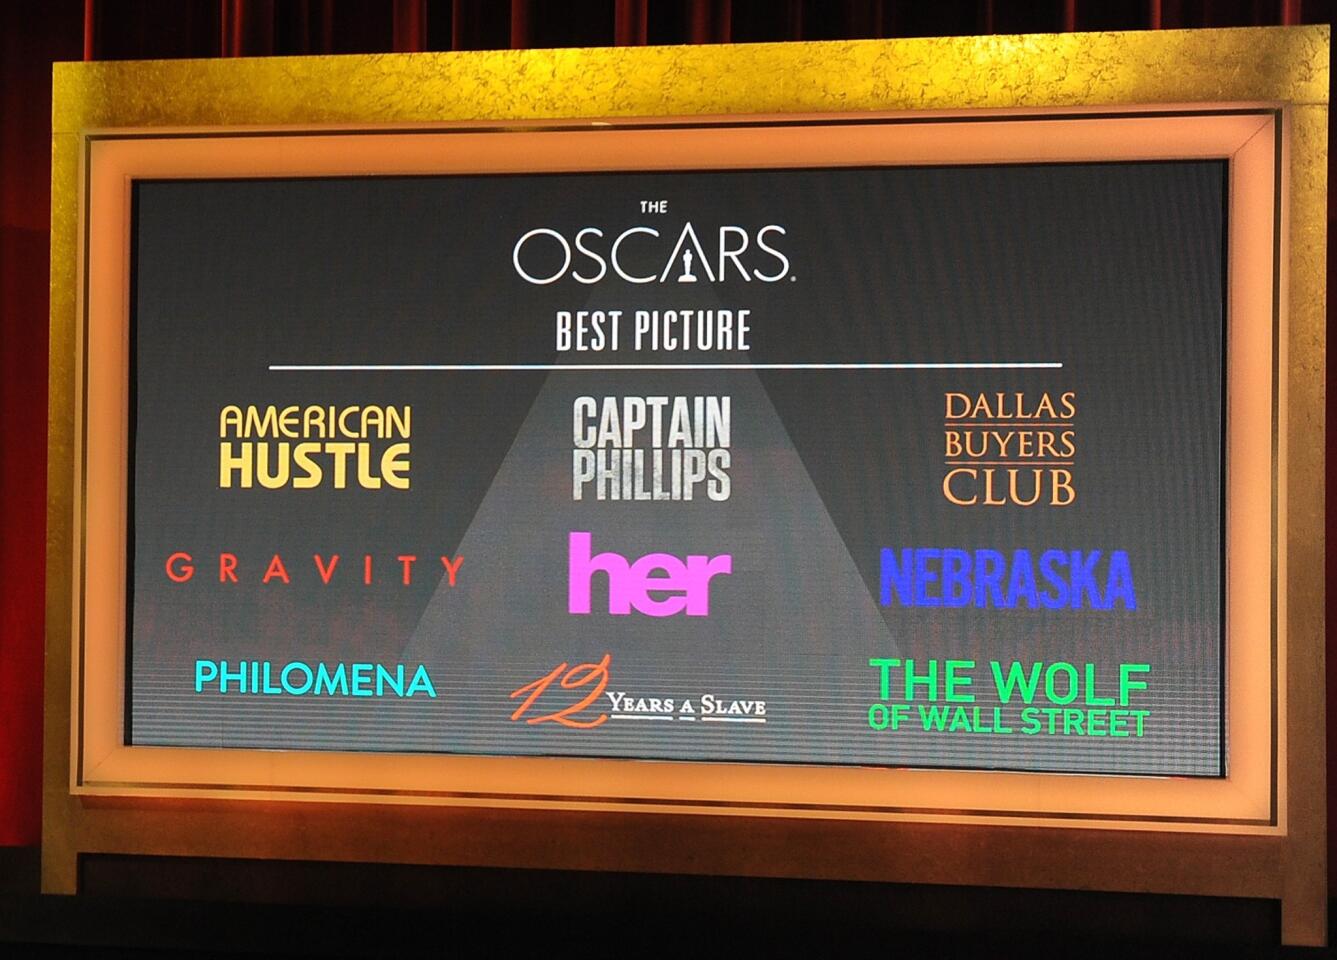 Four years ago, the Oscar race came down to a dazzling 3-D technological marvel ("Avatar") versus a harsh but beautifully realized slice of dramatic history ("The Hurt Locker"). This year's race reveals a similar dynamic between "Gravity" and "12 Years a Slave." But it's "American Hustle" - which has fun and crazy hair on its side - that may have the best shot.